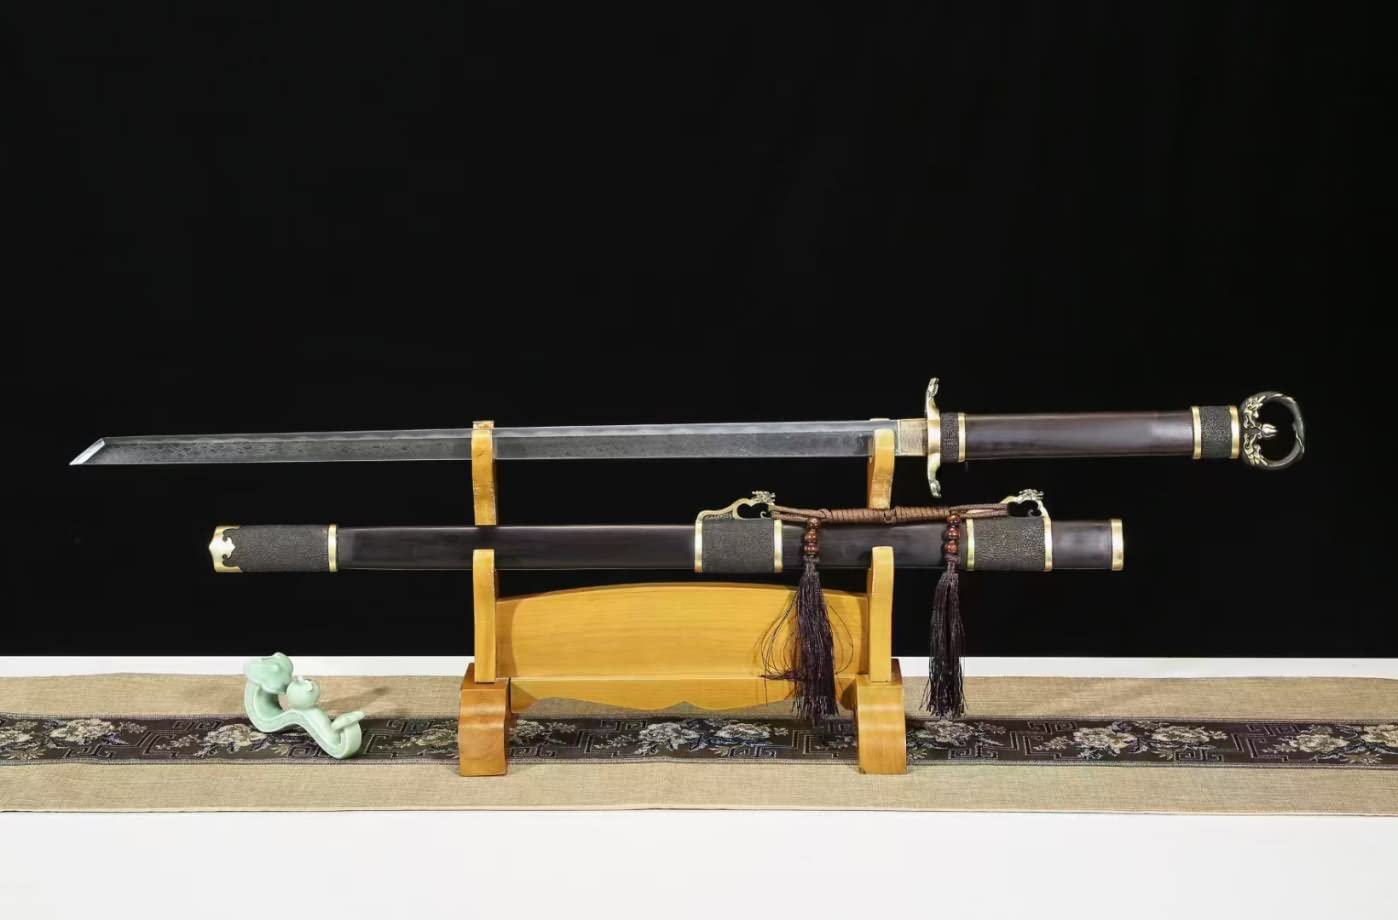 Tang dao,Forged Damascus Blade,Brass Fittings,Ebony Scabbard,chinese swords